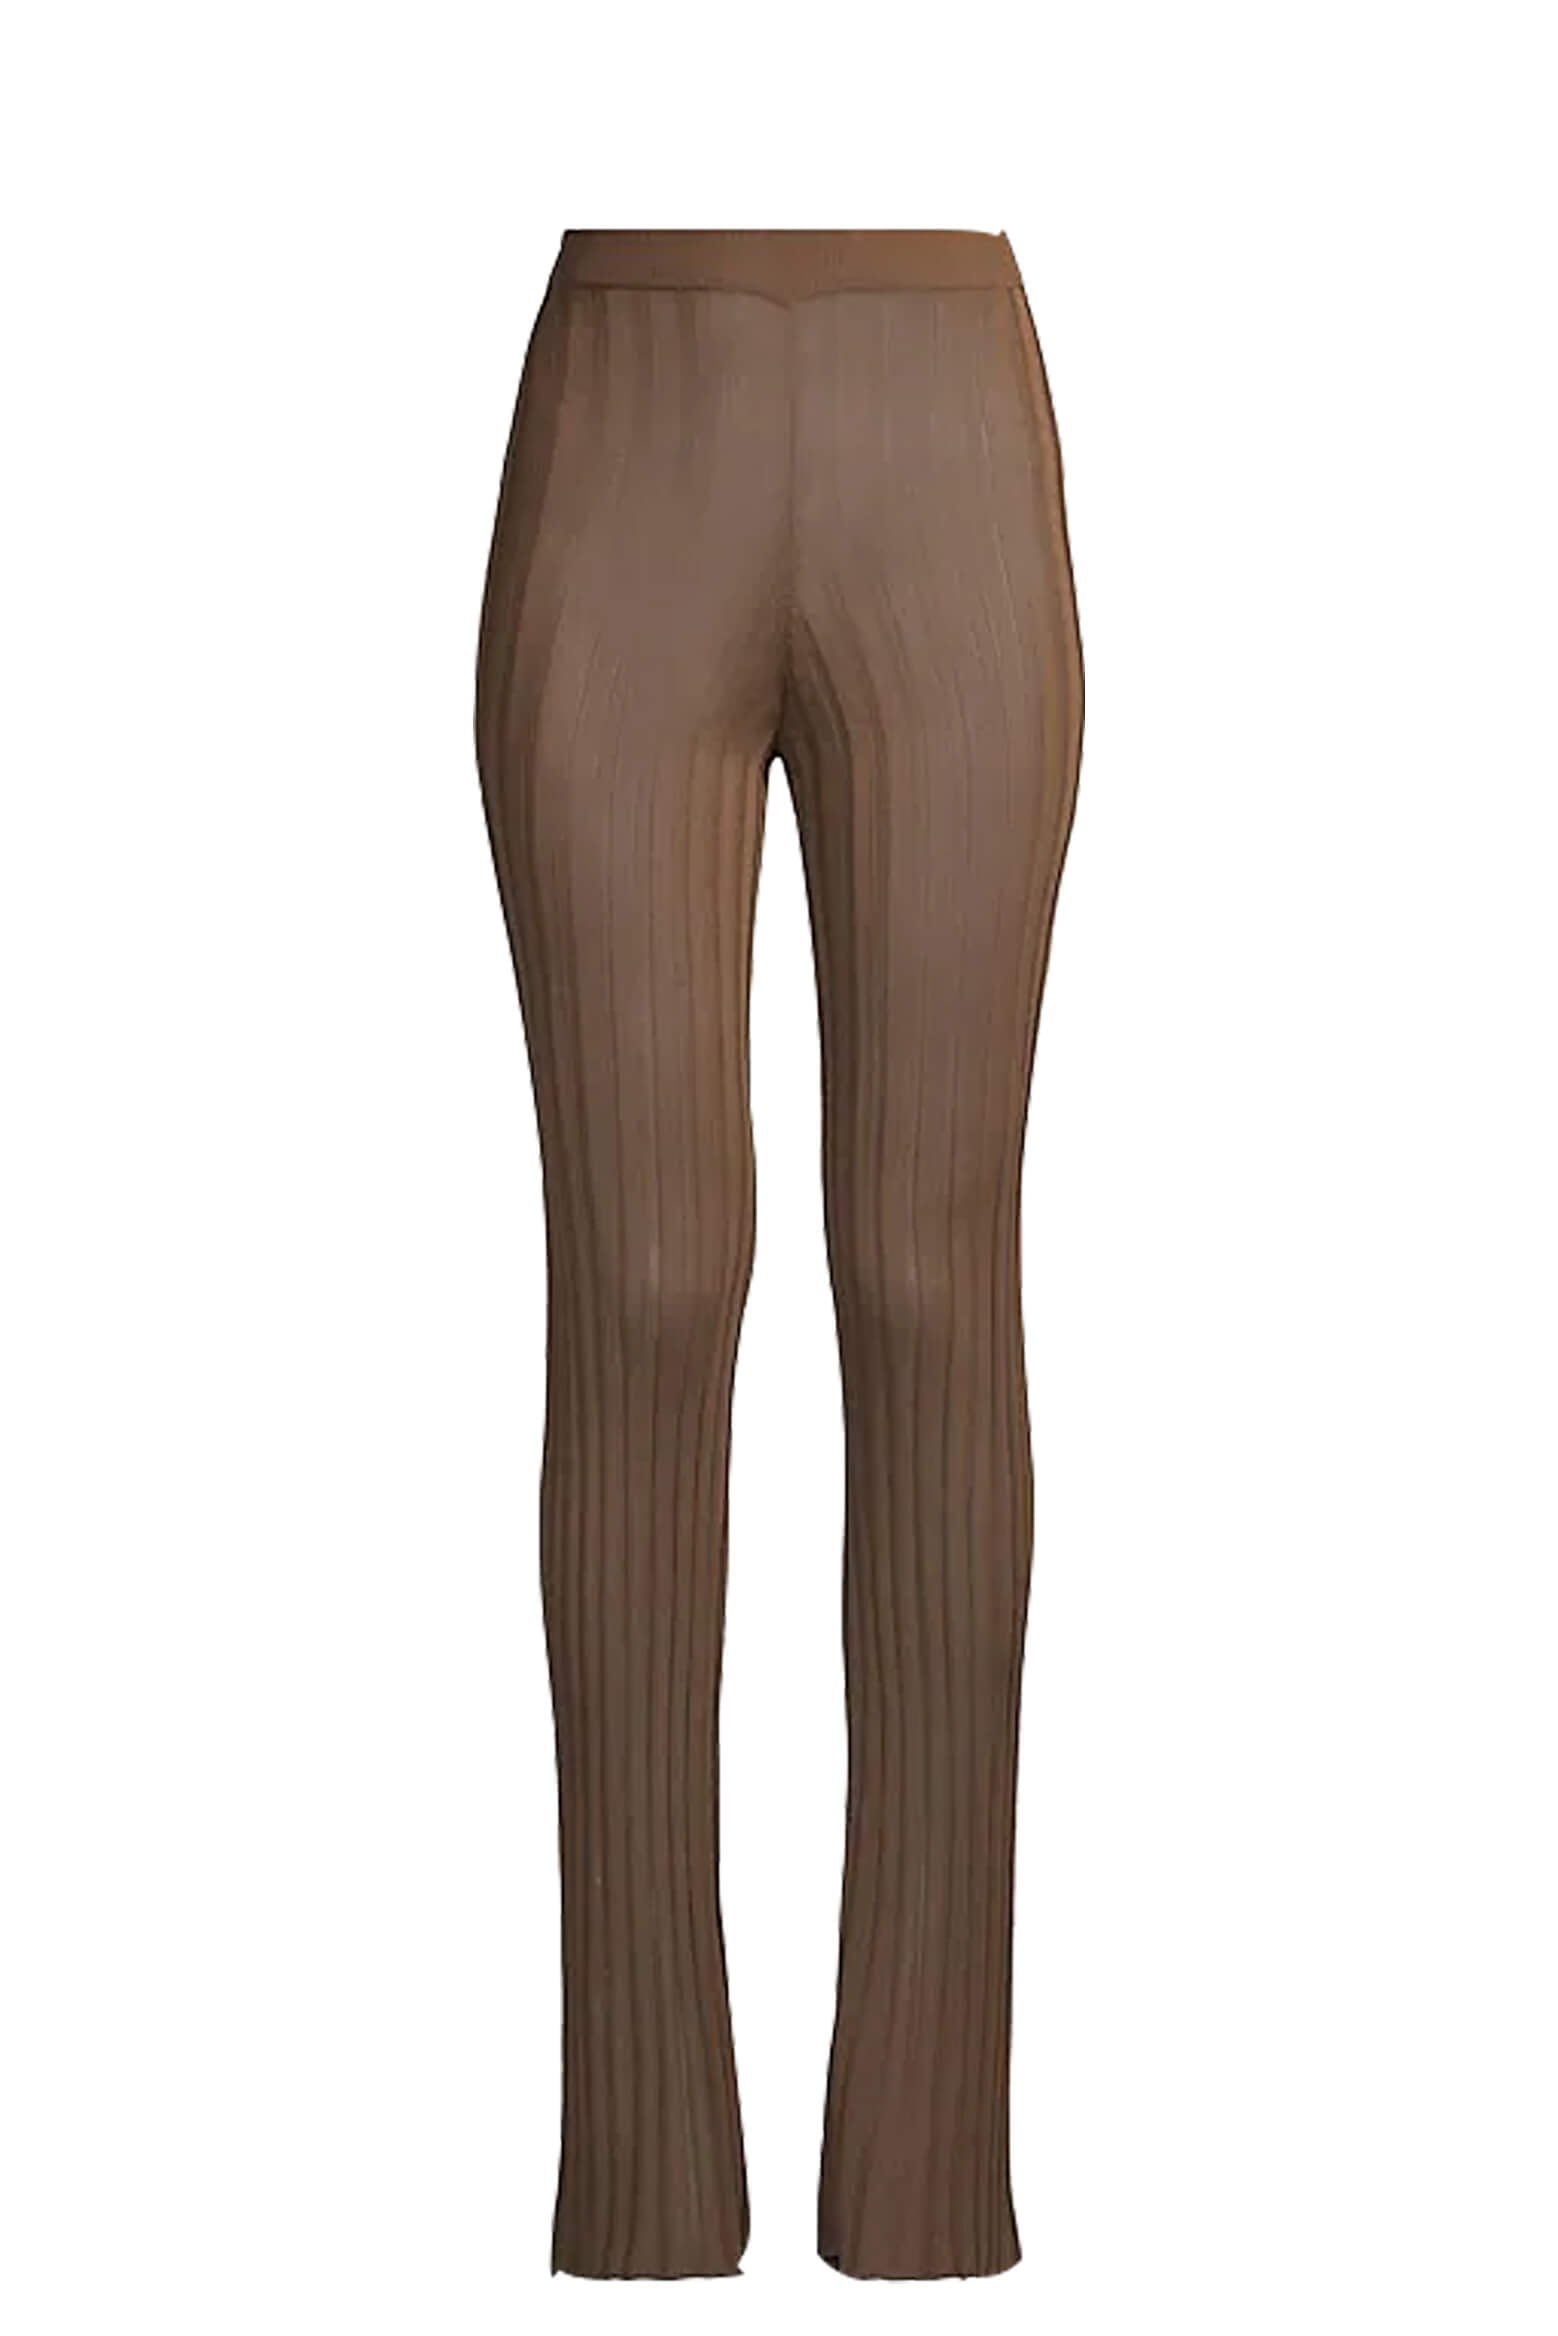 SIR Aya Pant in Chocolate available online and instore at The New Trend